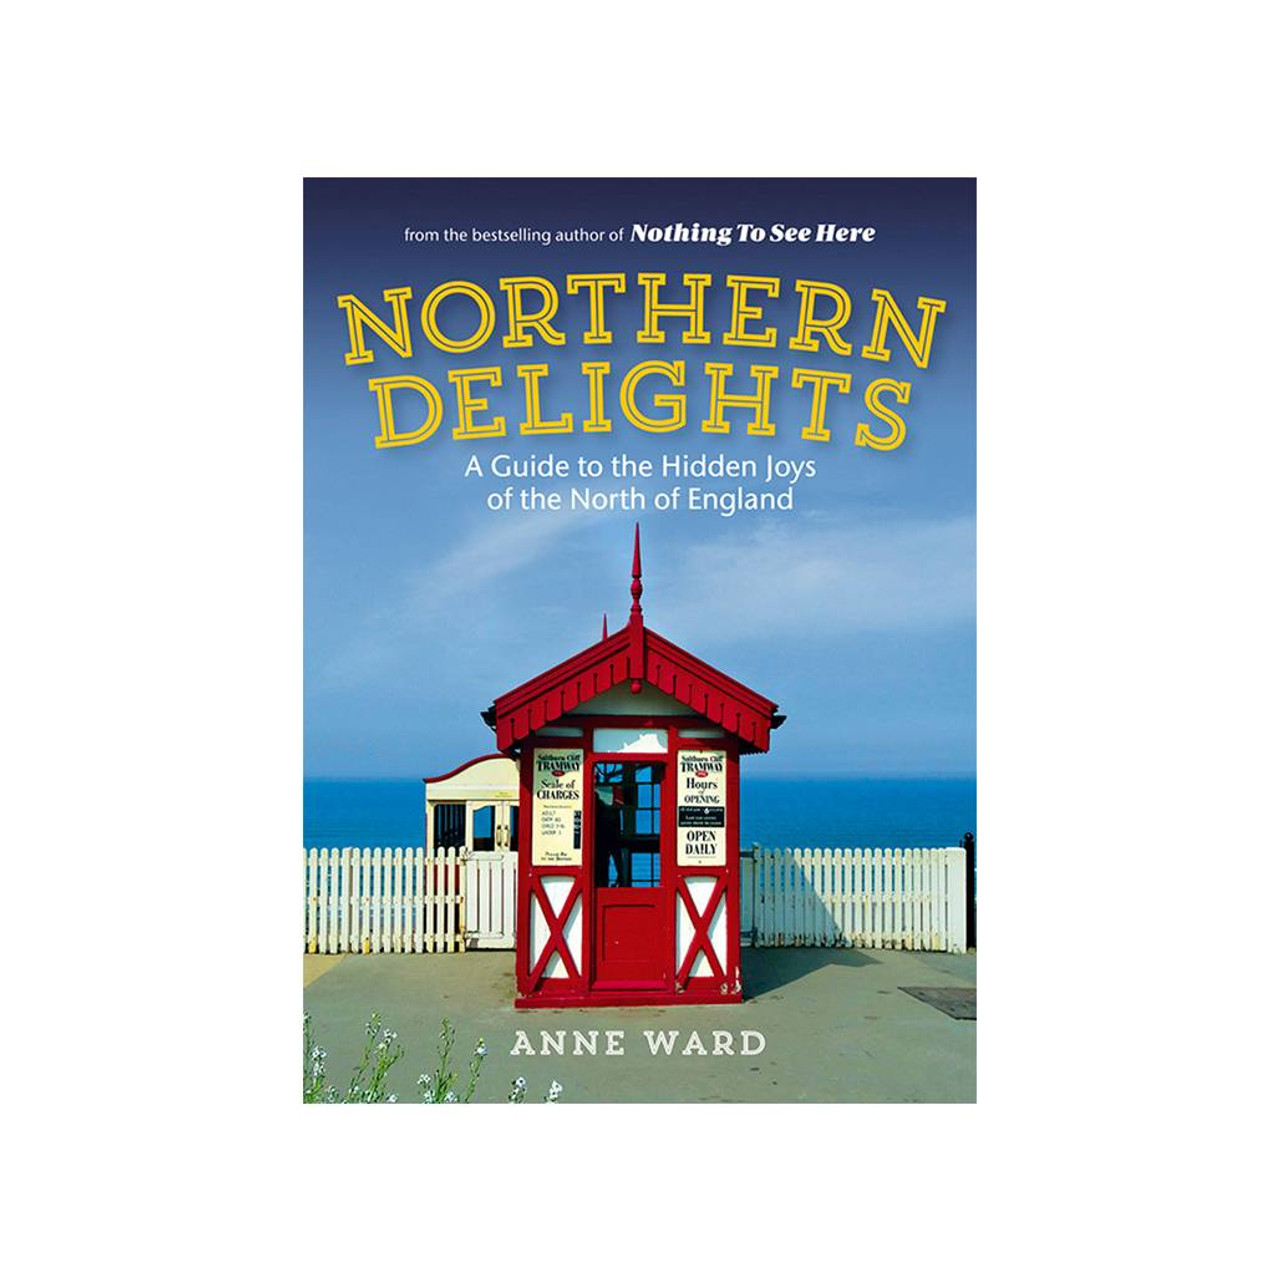 Northern Delights: A Guide To The Hidden Joys Of The North Of England